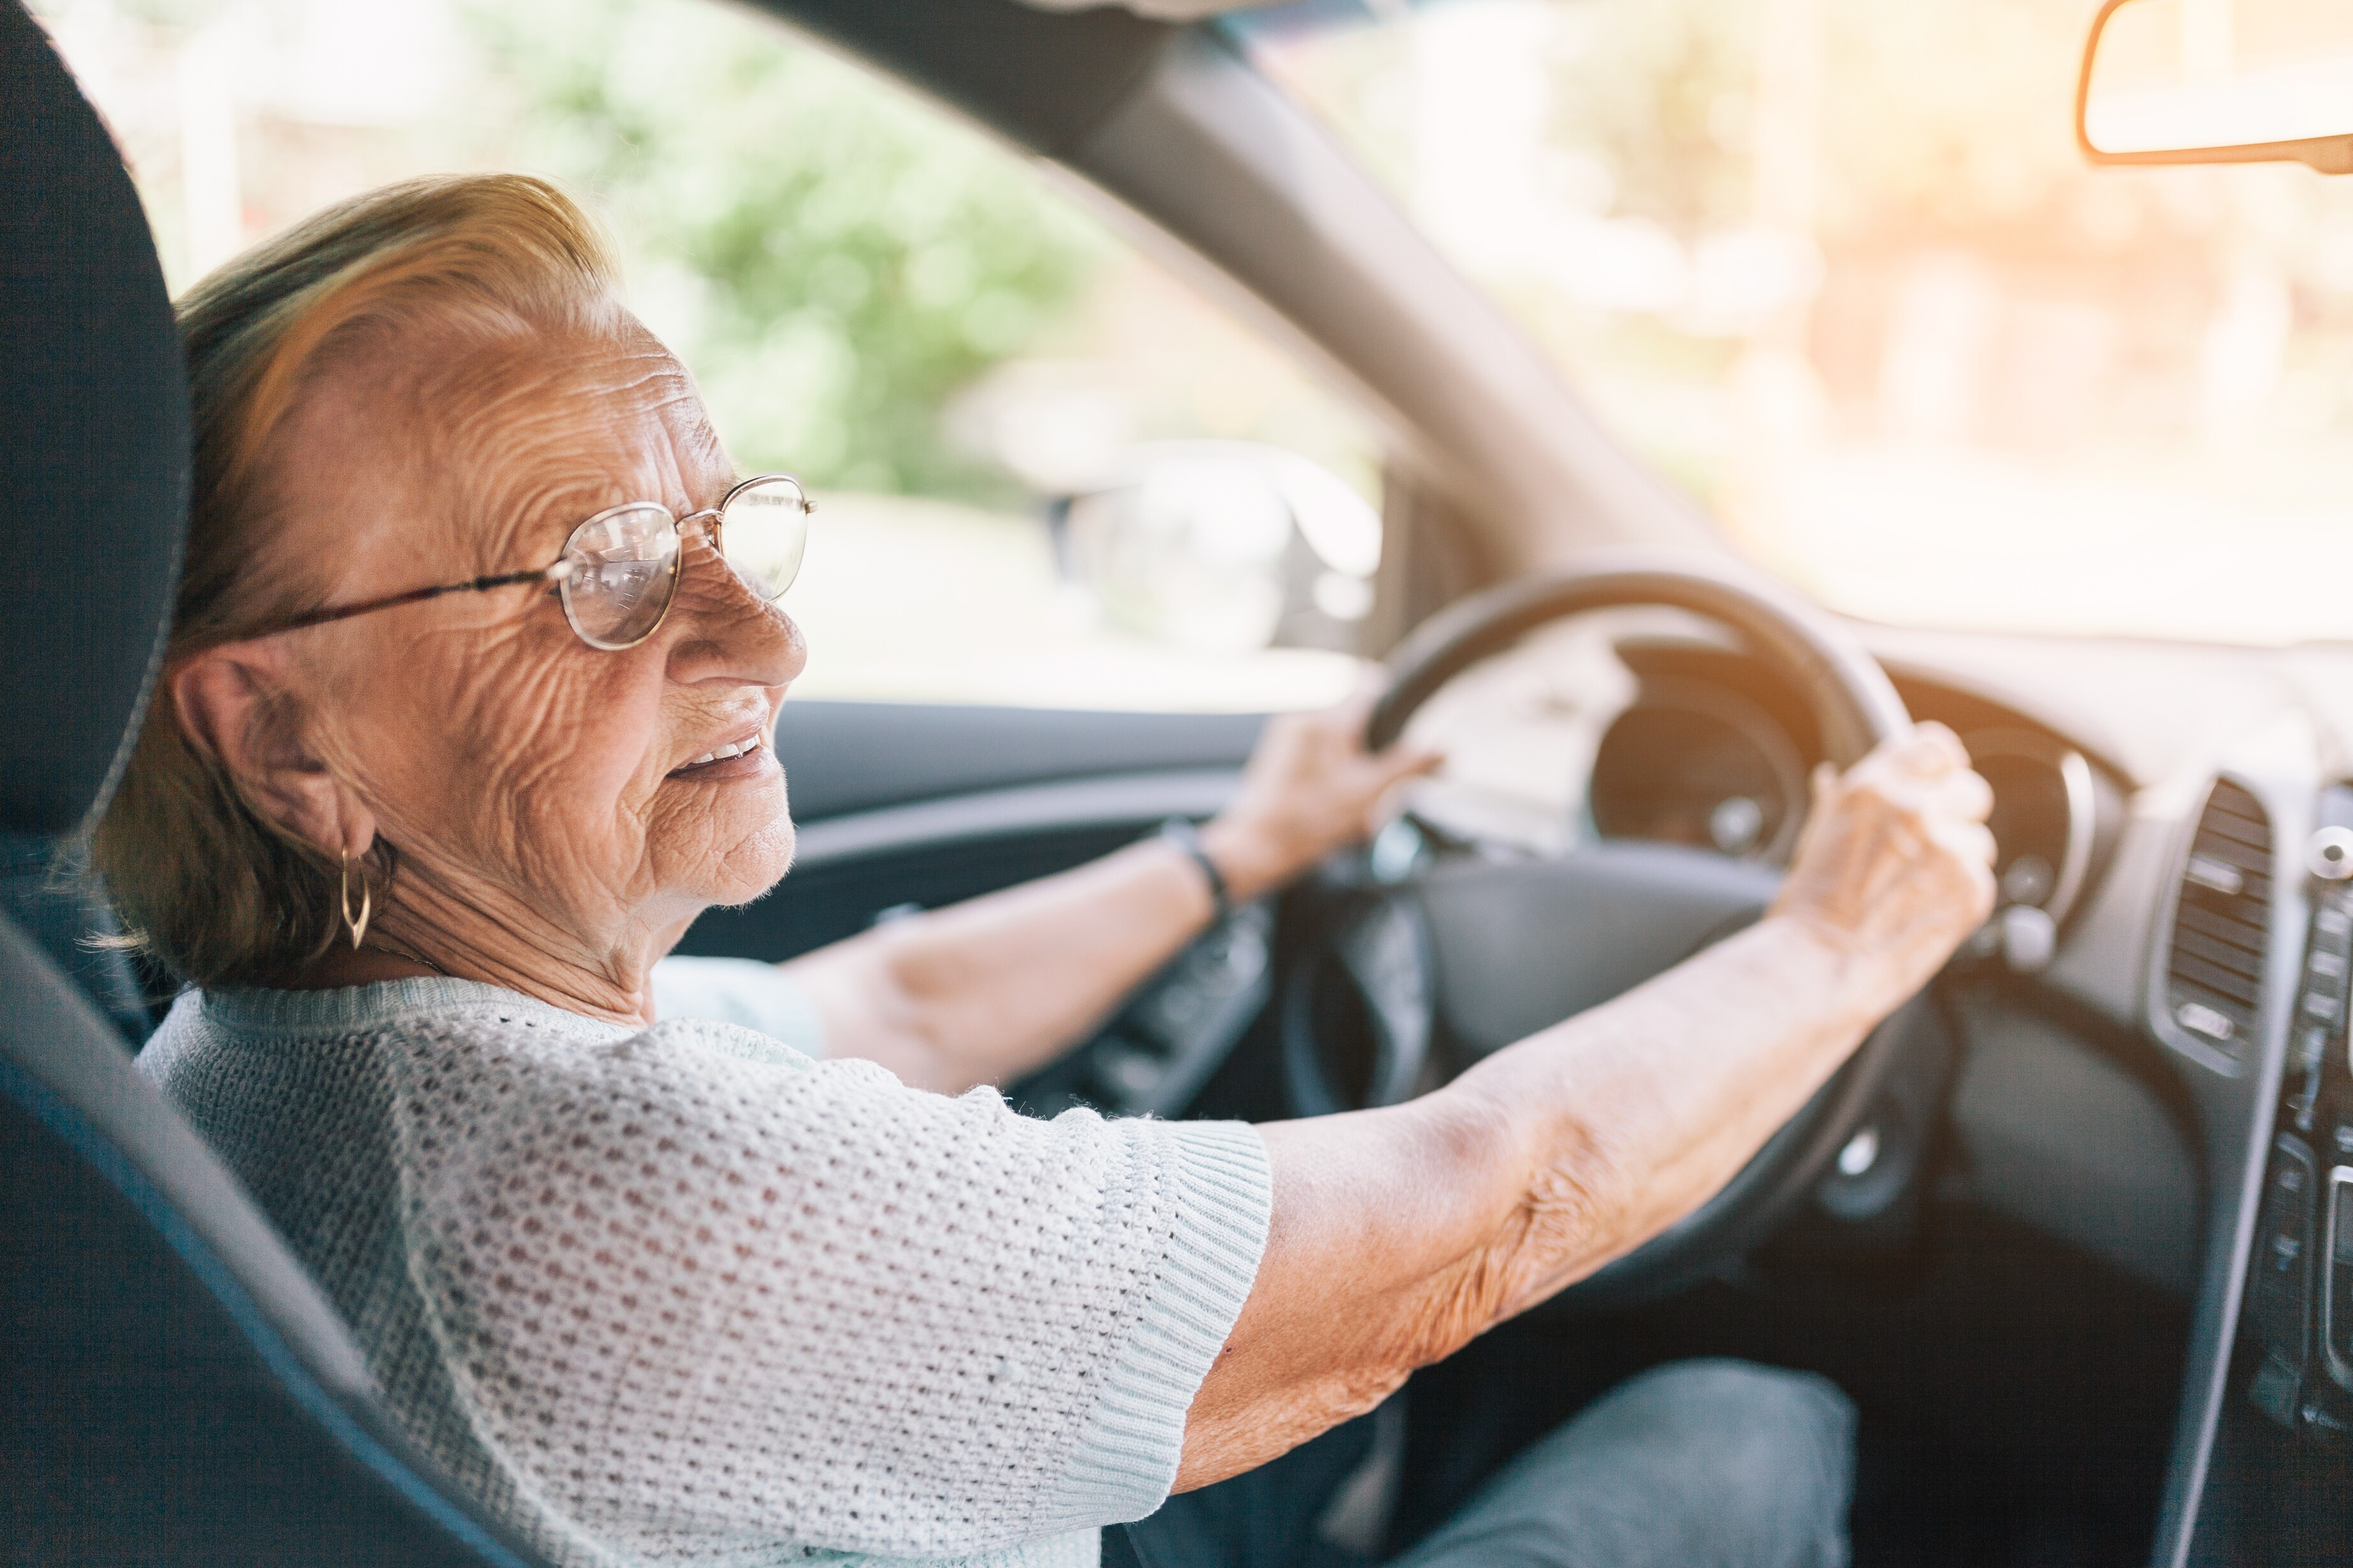 8 out of 10 senior citizens can still drive safely